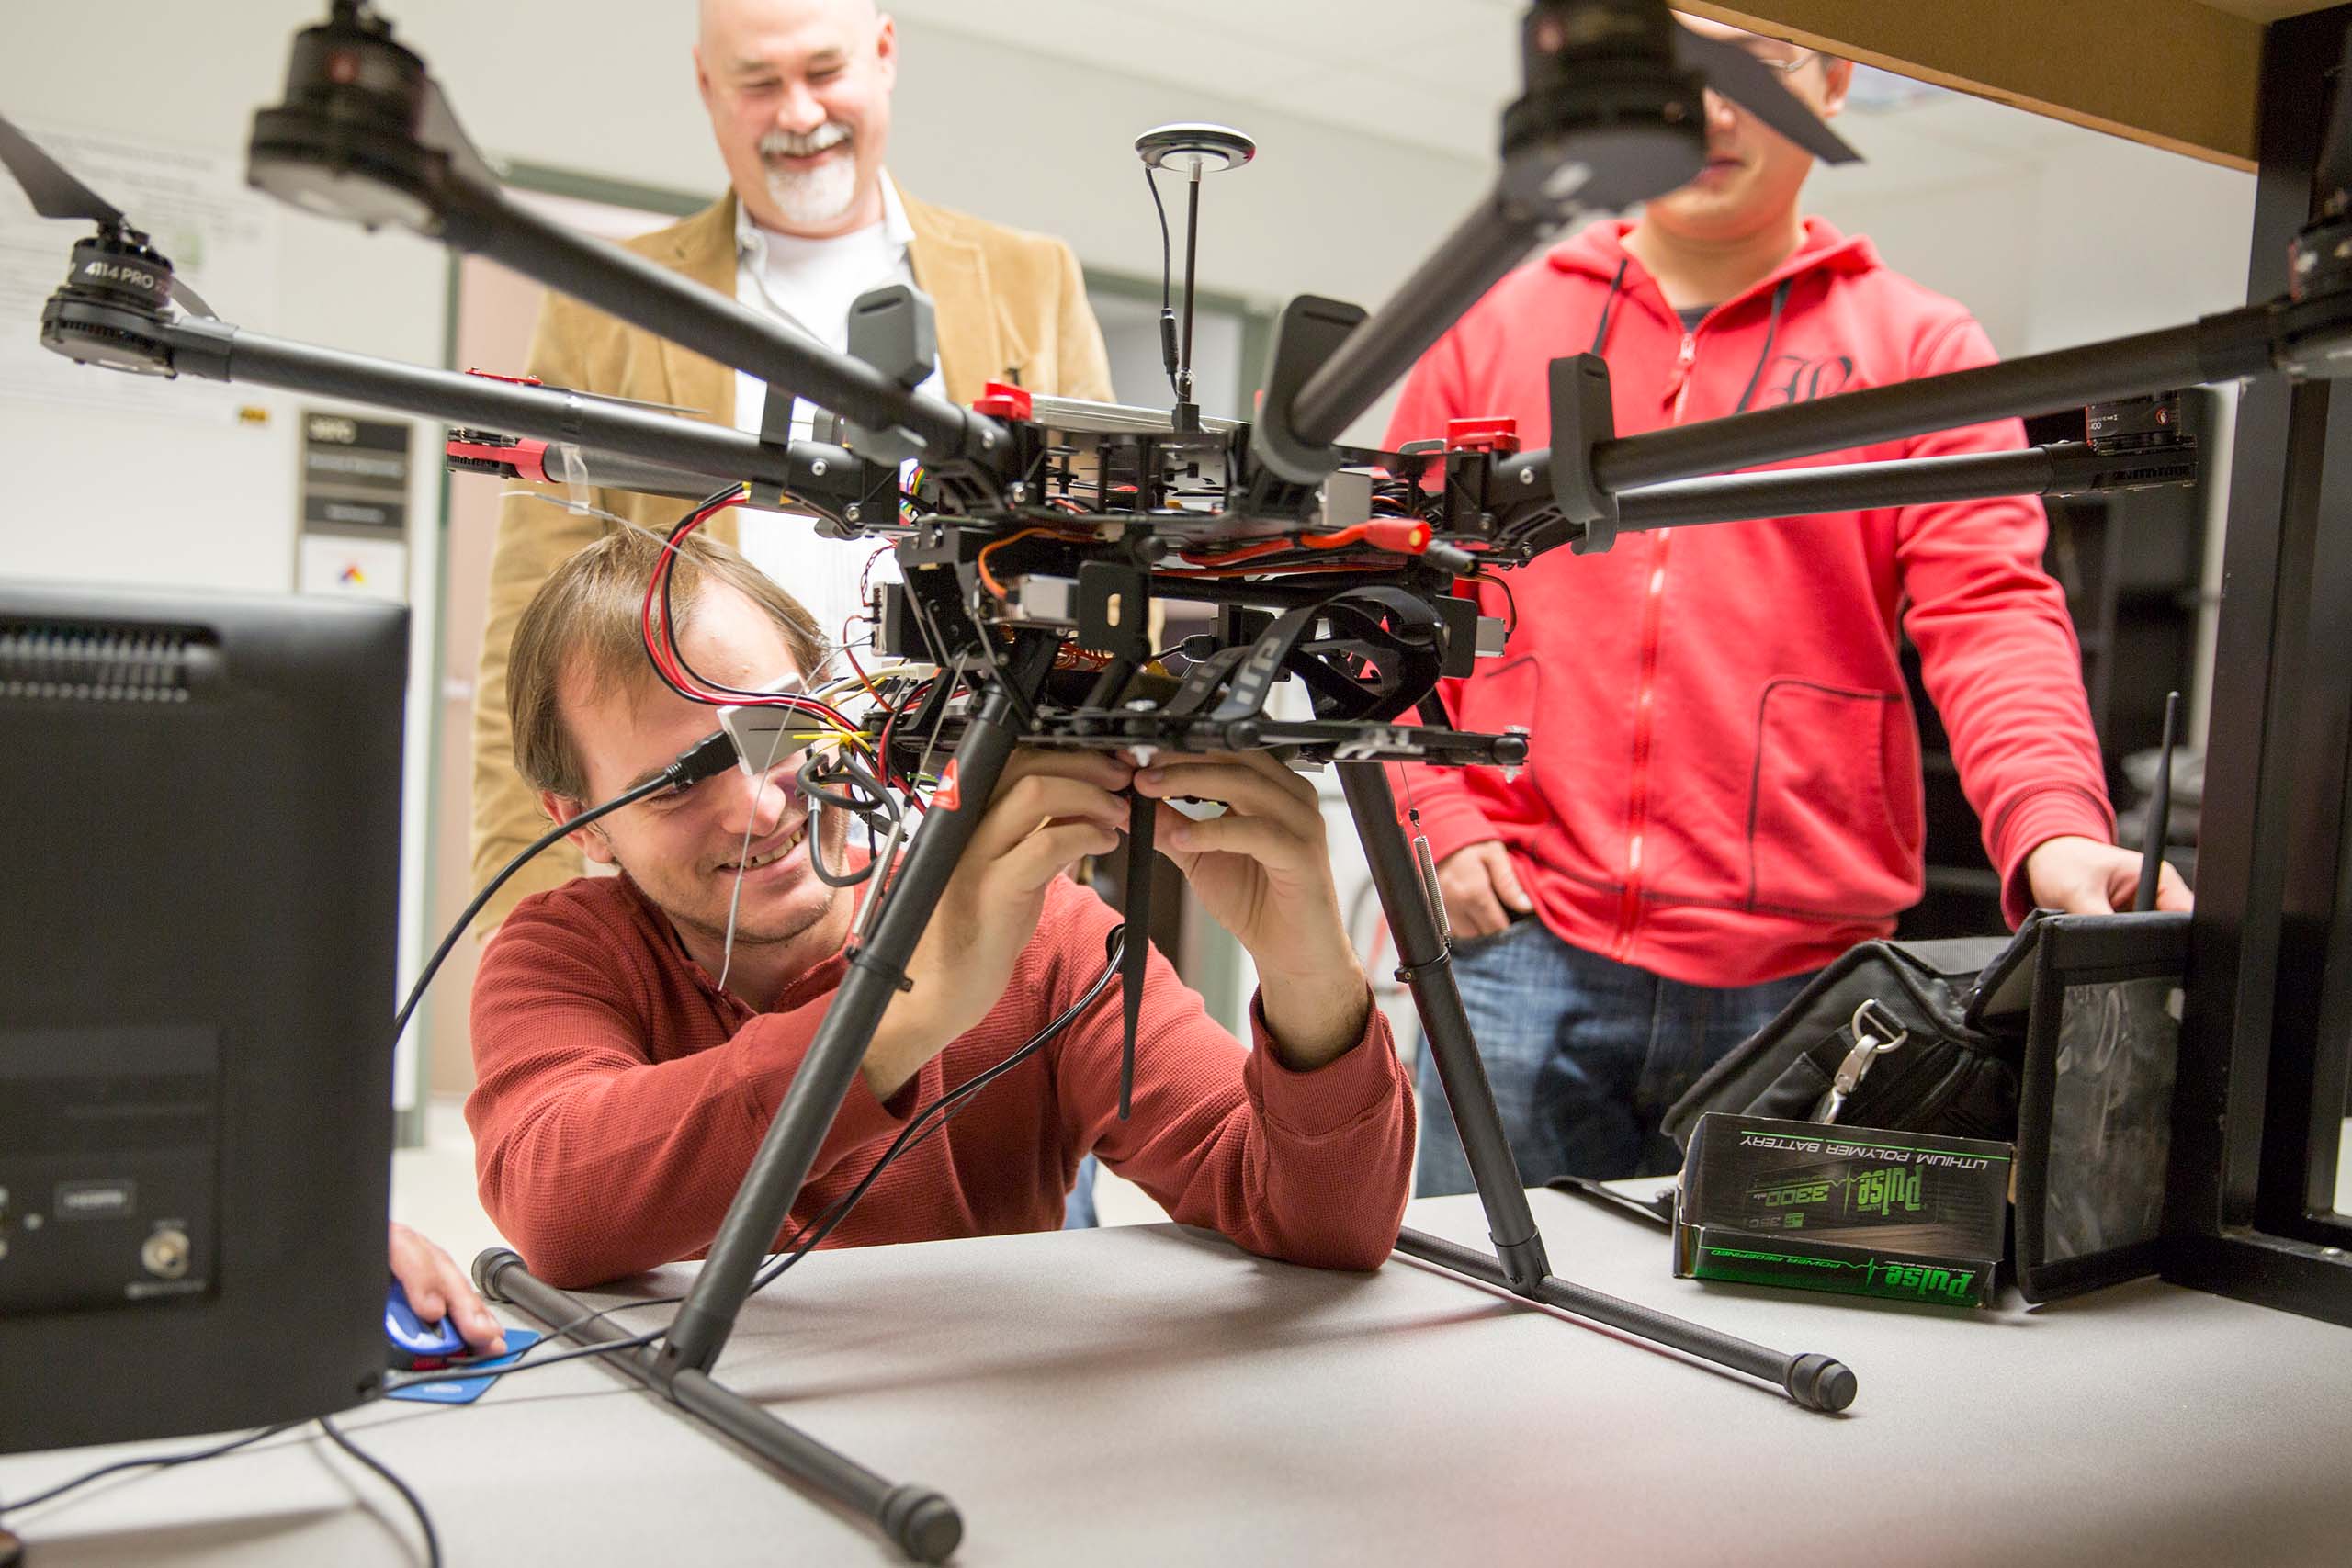 Students and faculty conduct work on a drone in a lab